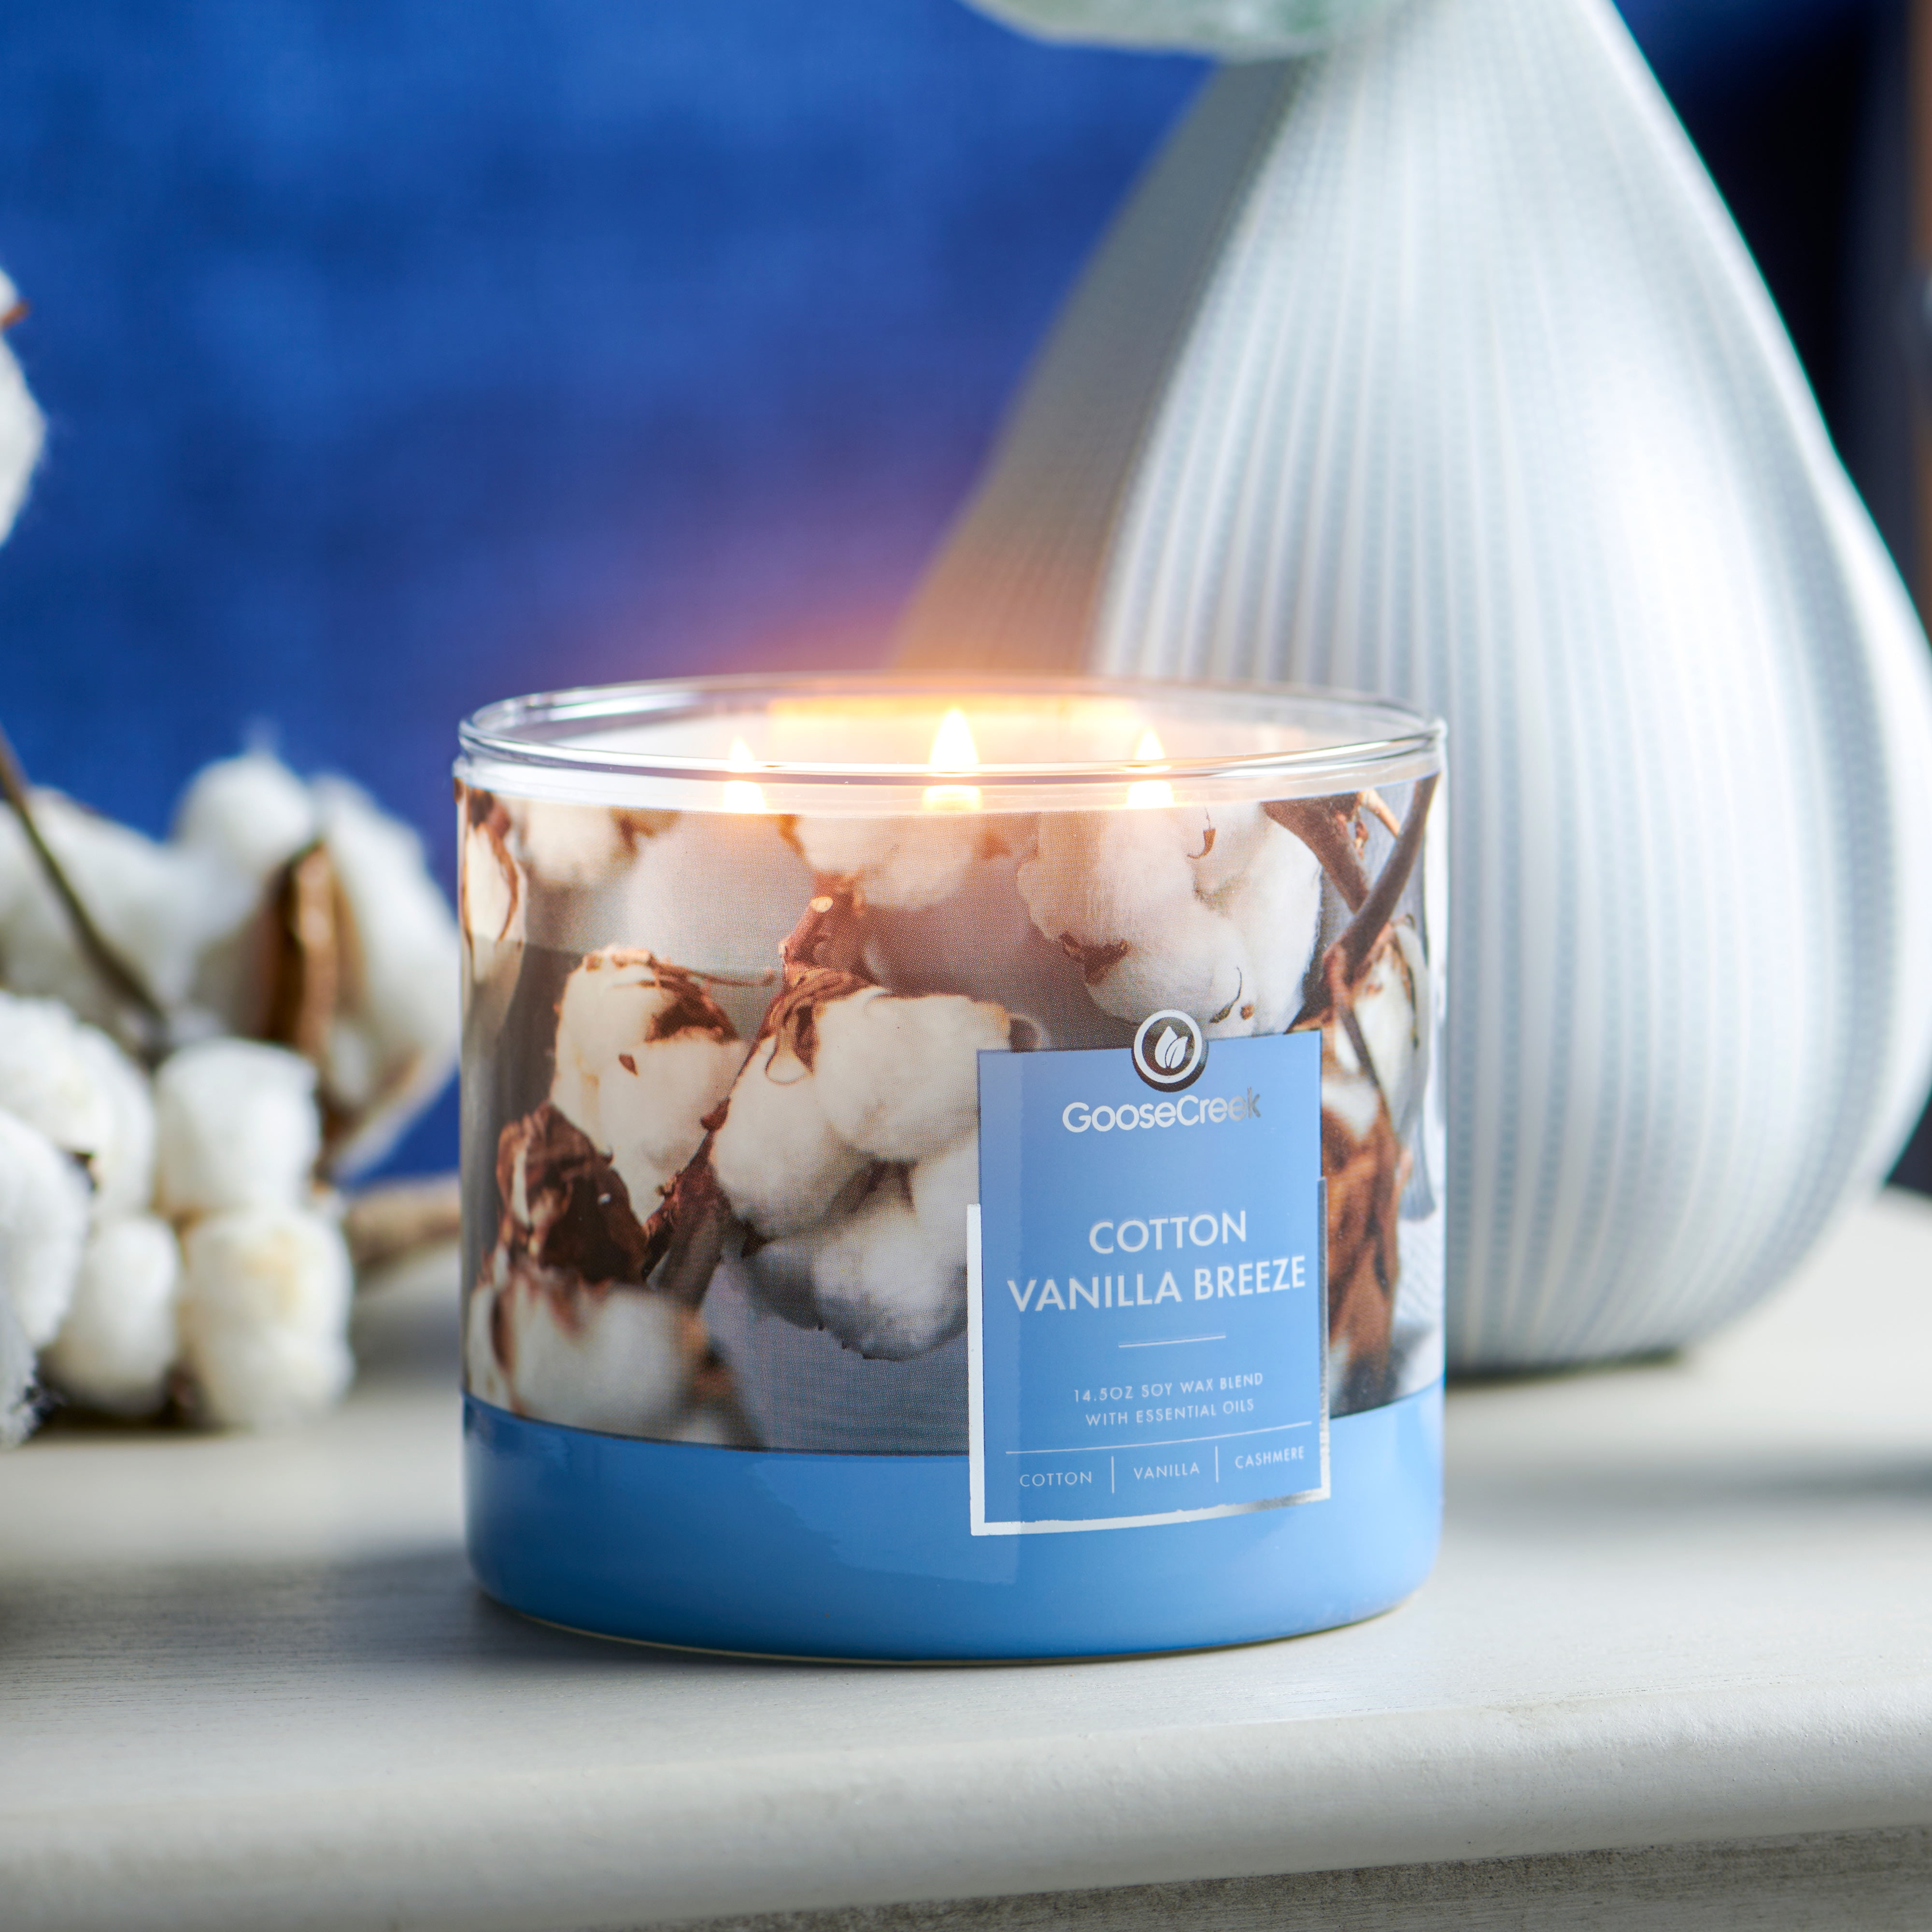 What Does Vanilla Smell Like? – Goose Creek Candle